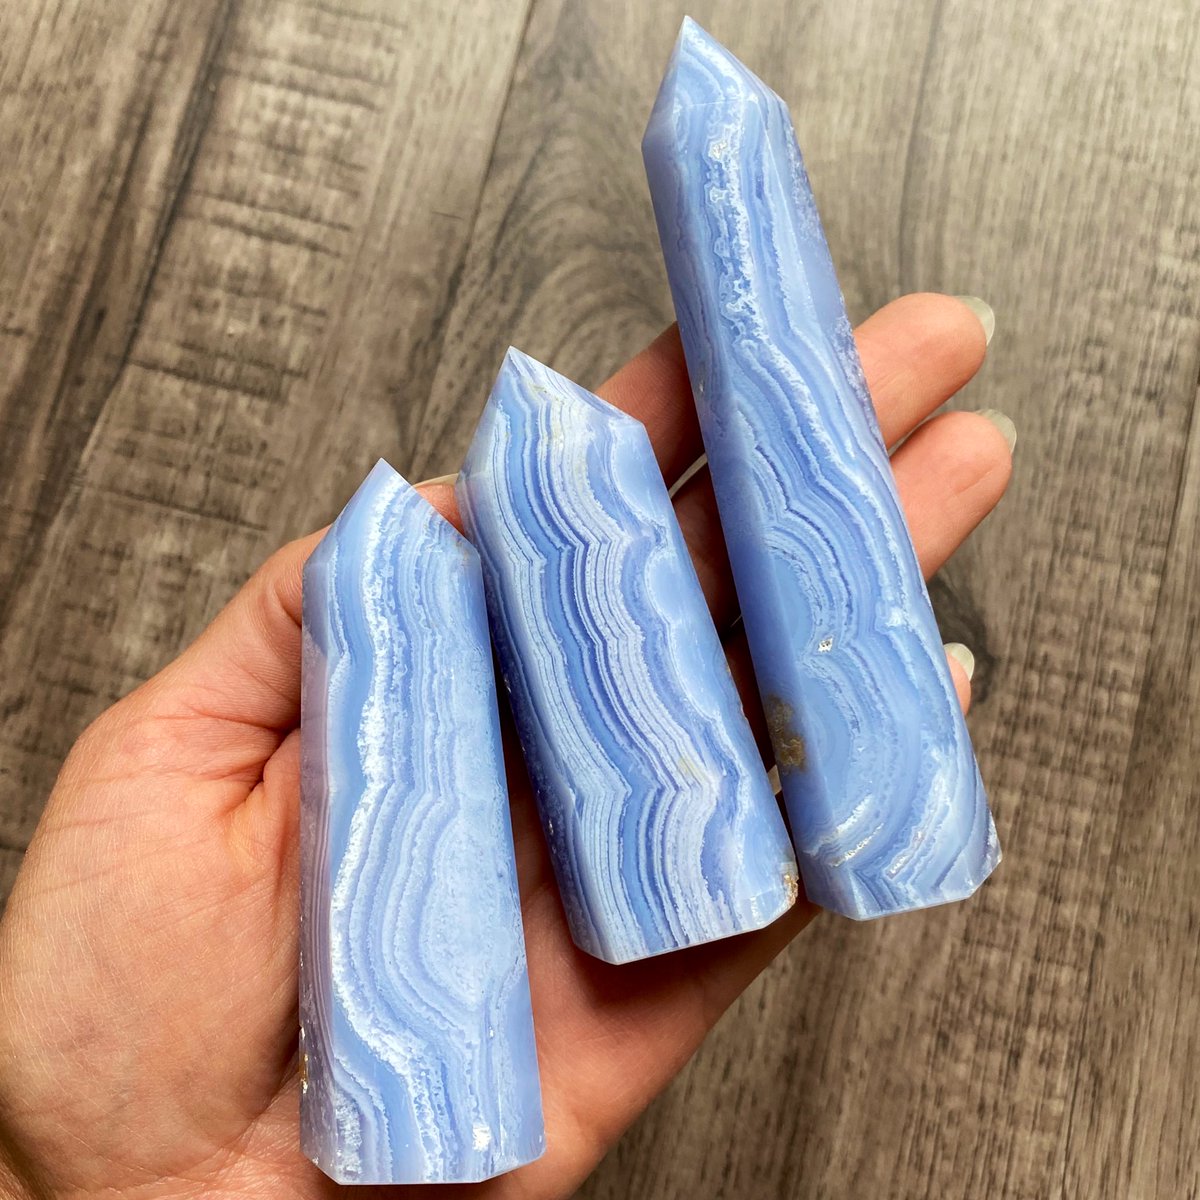 𝙶𝚘𝚘𝚍 𝙹𝚞𝚞 𝙹𝚞𝚞 𝙲𝚛𝚢𝚜𝚝𝚊𝚕𝚜 On Twitter Blue Lace Agate Towers From South Africa Have Finally Arrived These Beauties Will Be Available In Our Juneteenth Shop Update 6 19 Https T Co 6w0awr2quq